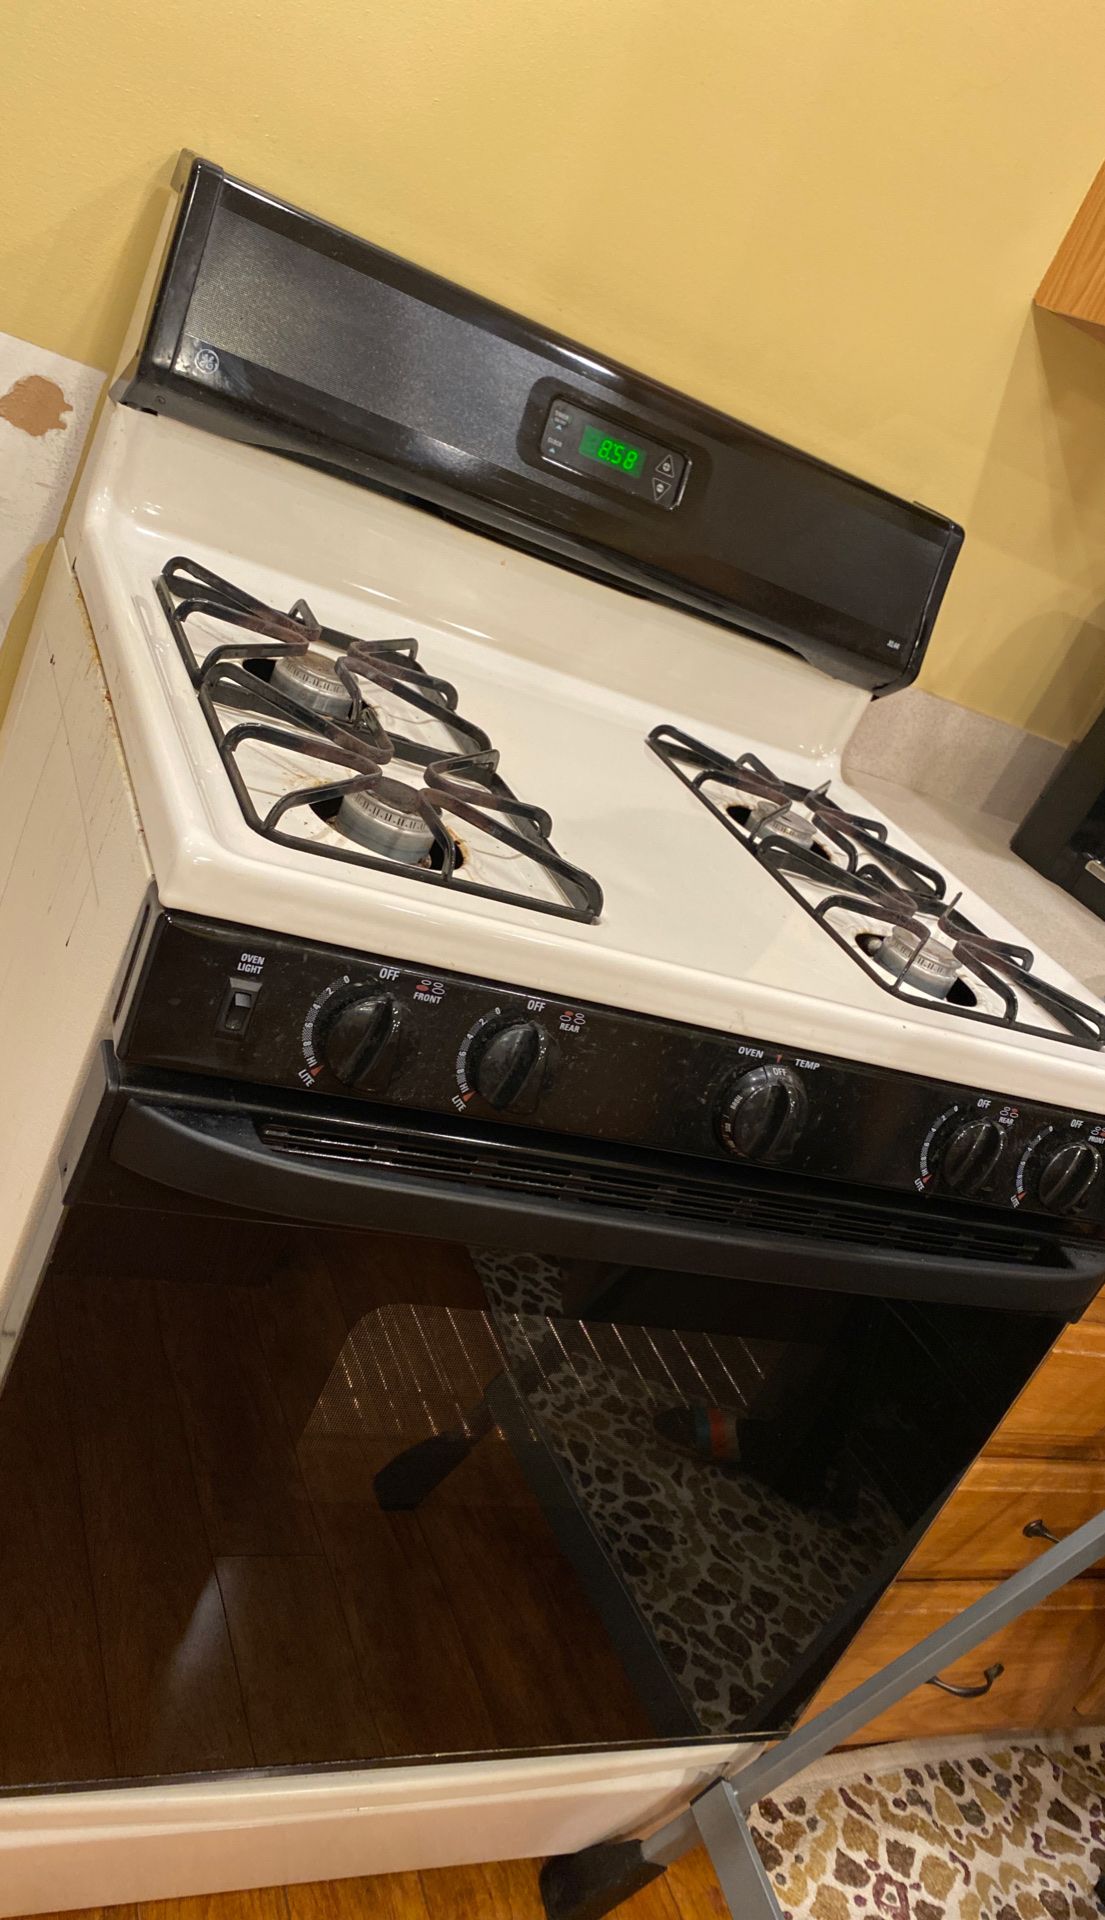 Oven / Stovetop GENERAL ELECTRIC XL44